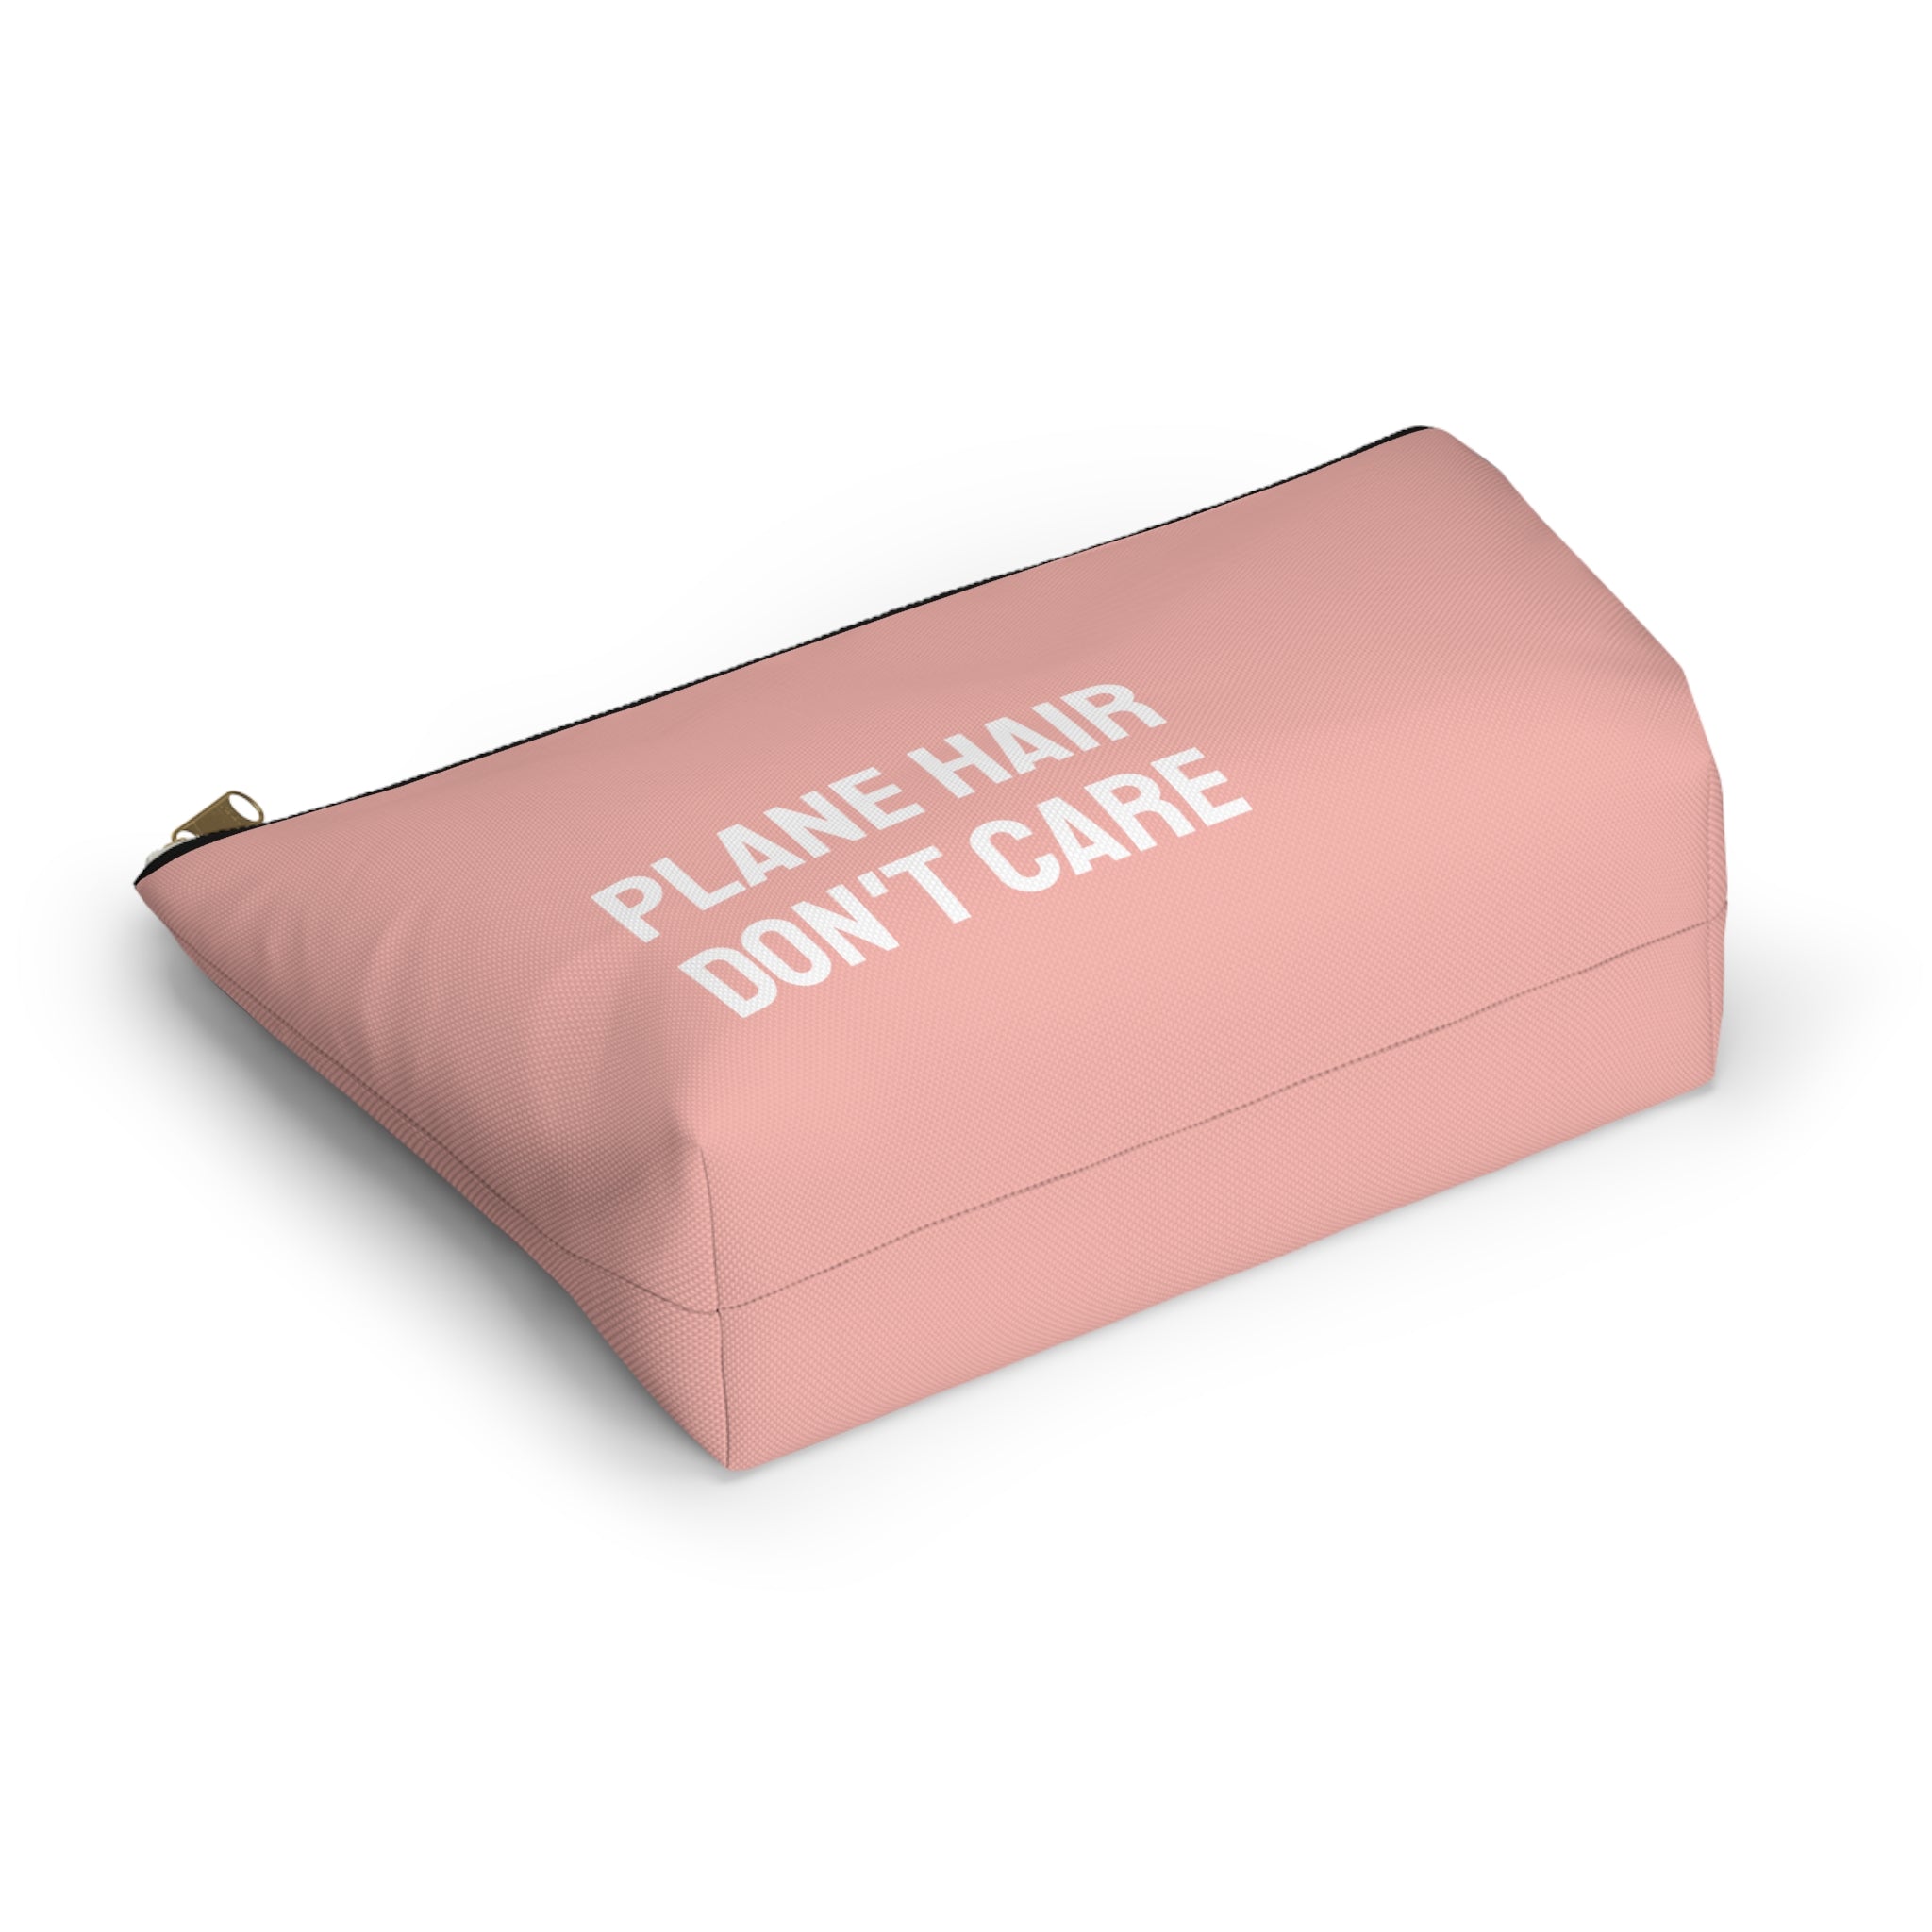 Plane hair don't care Pouch (Pink)